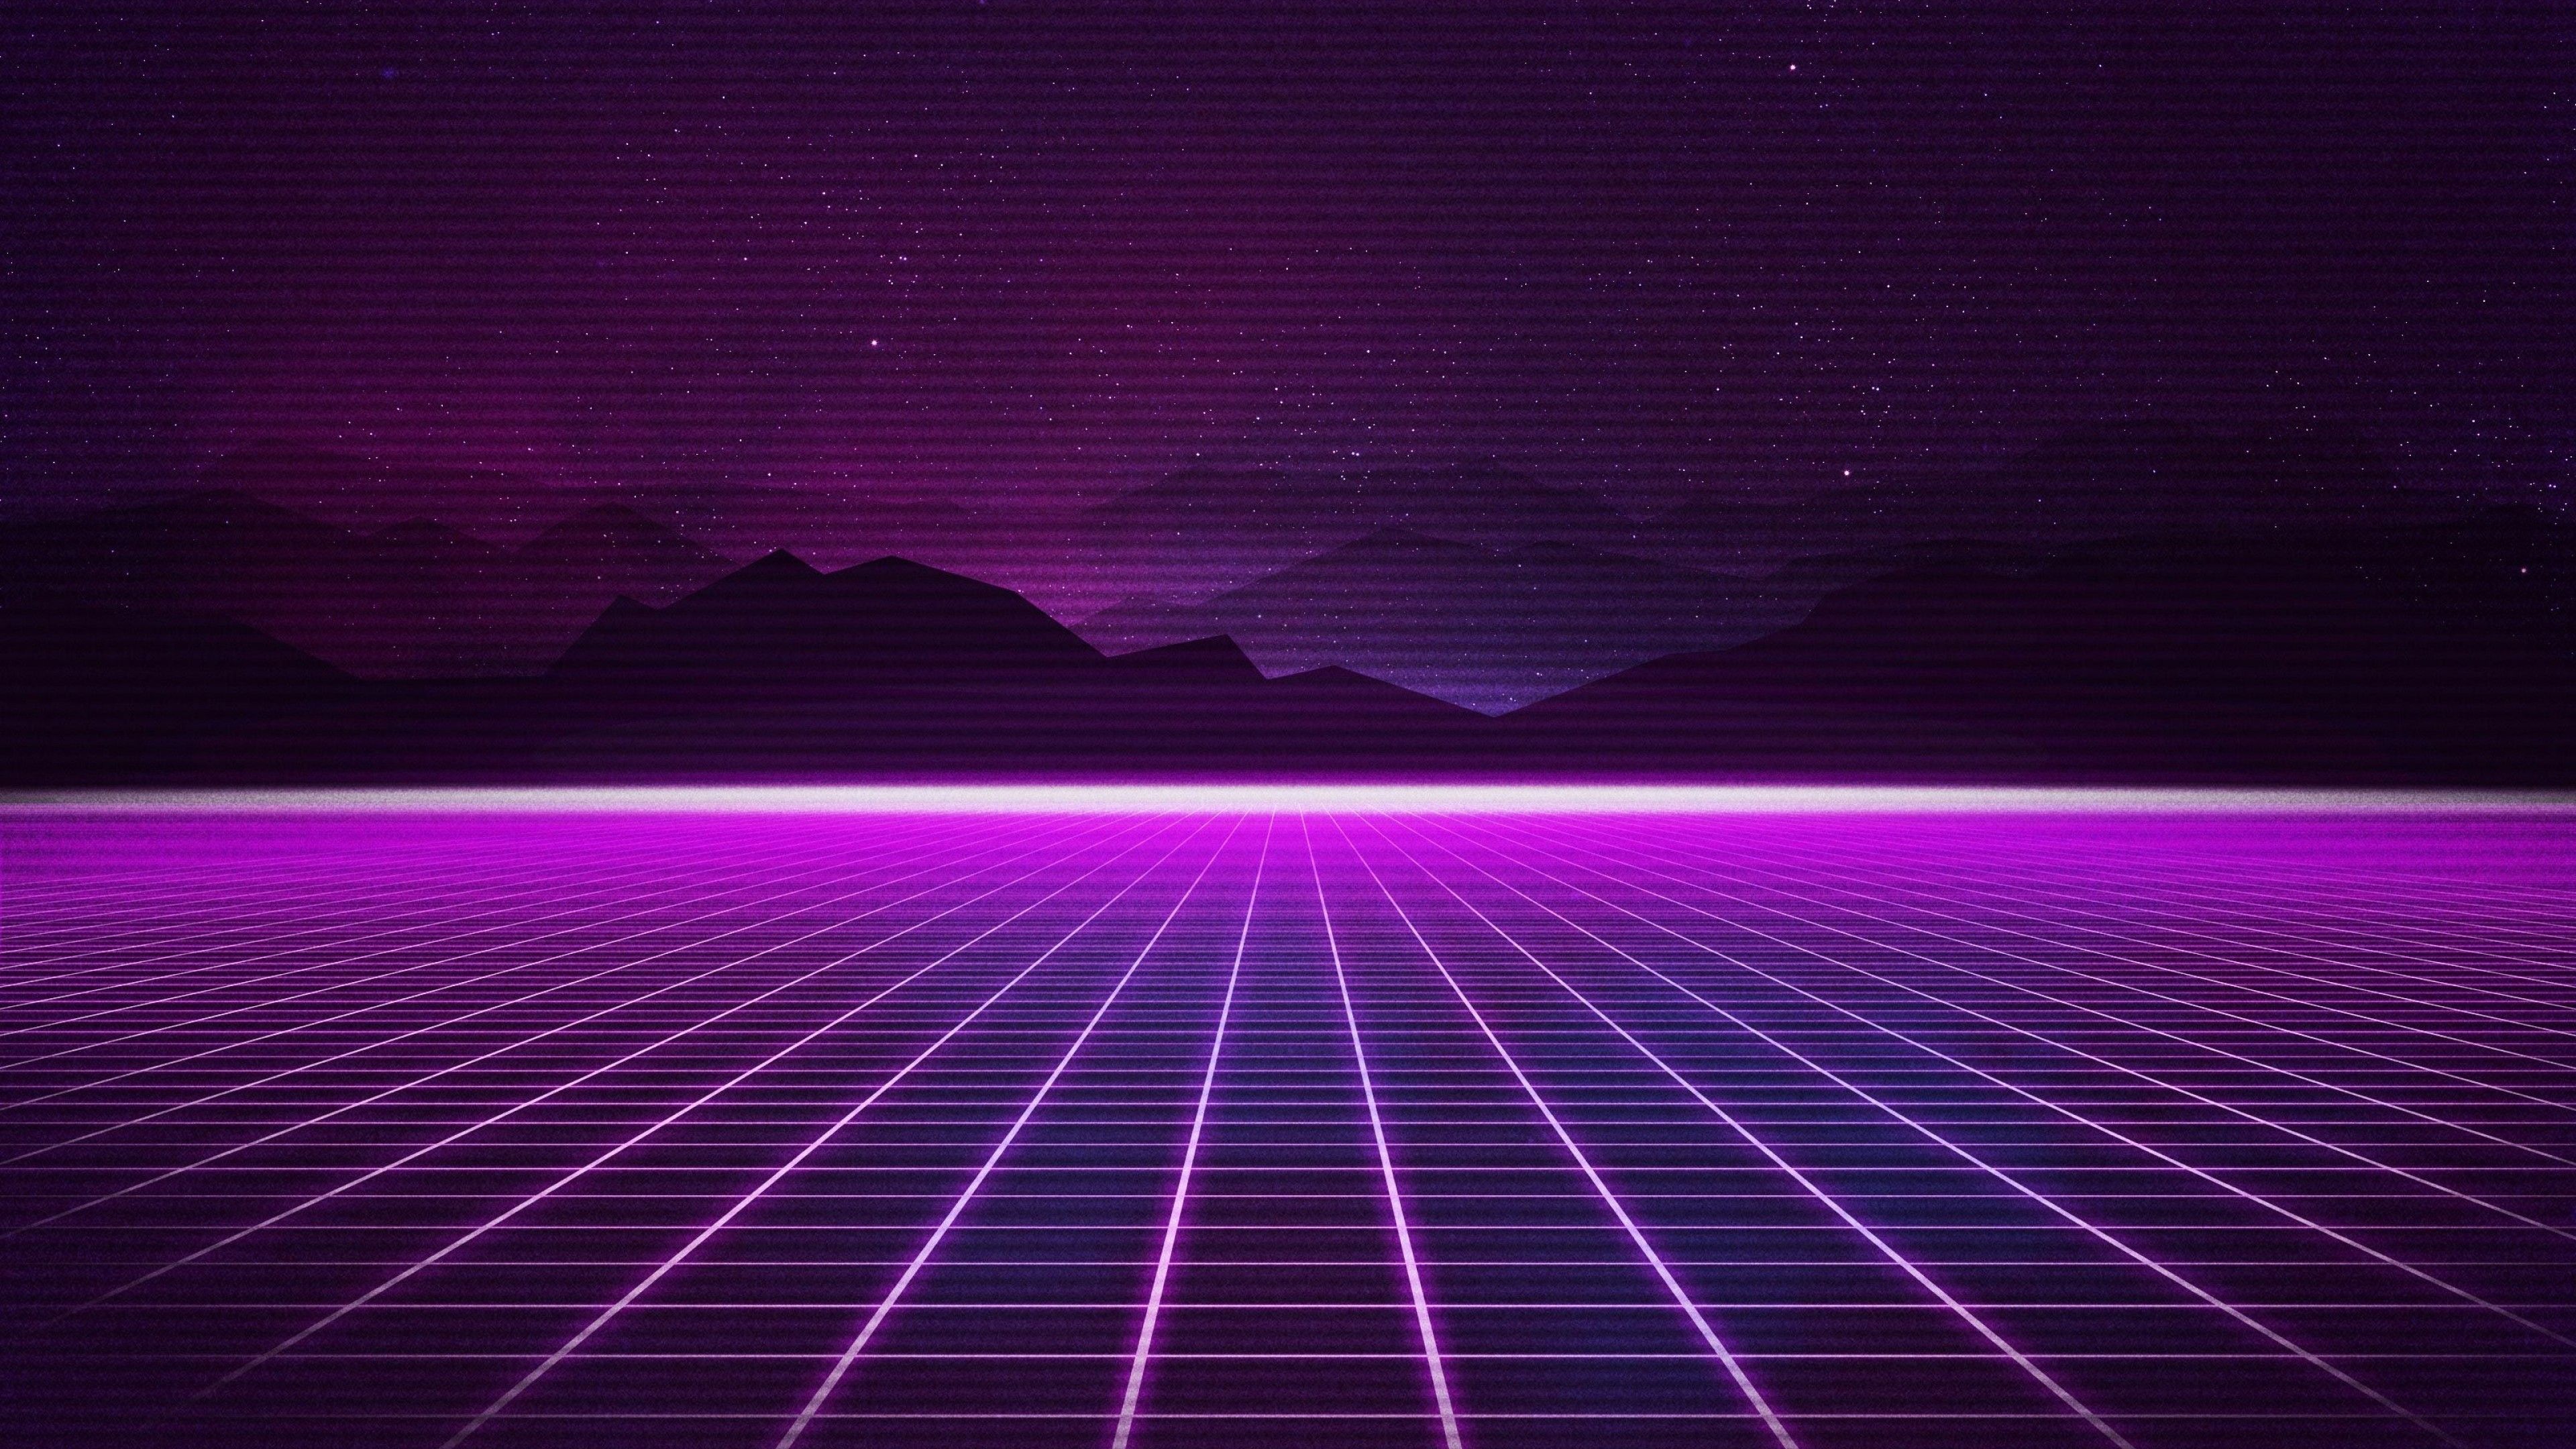 Synthwave Desktop Wallpaper. Wallpaper Music, Stars, Background, 80s, Neon, 80's, Synth, Retrowave, Synthwave, New Retro Wave, Futuresynth, Sintav, Retrouve, Outrun image for desktop